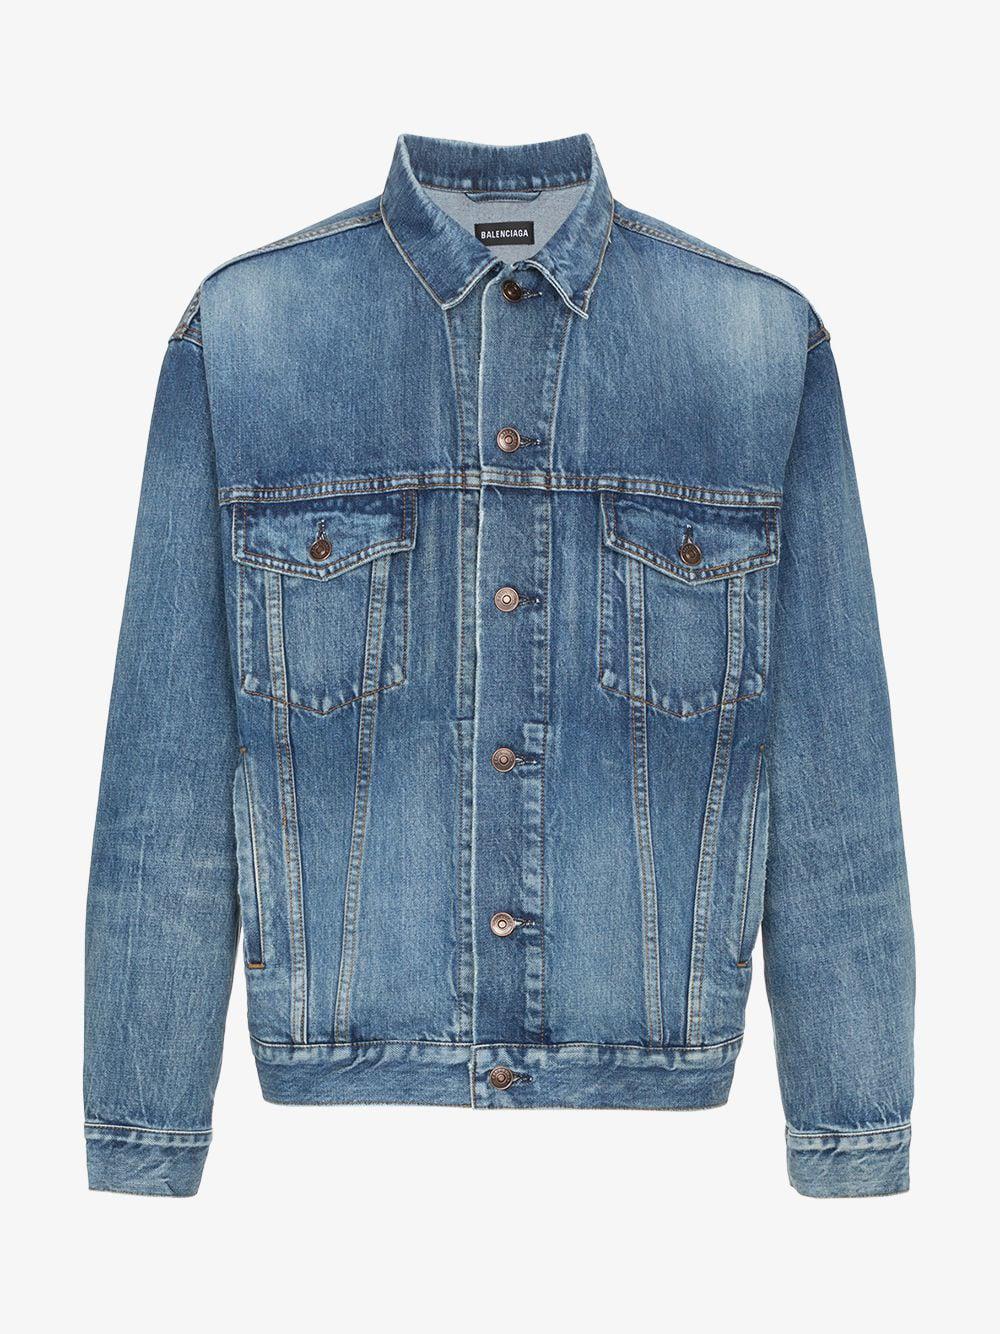 Balenciaga Embroidered Bb Mode Denim Jacket in Blue for Men - Lyst